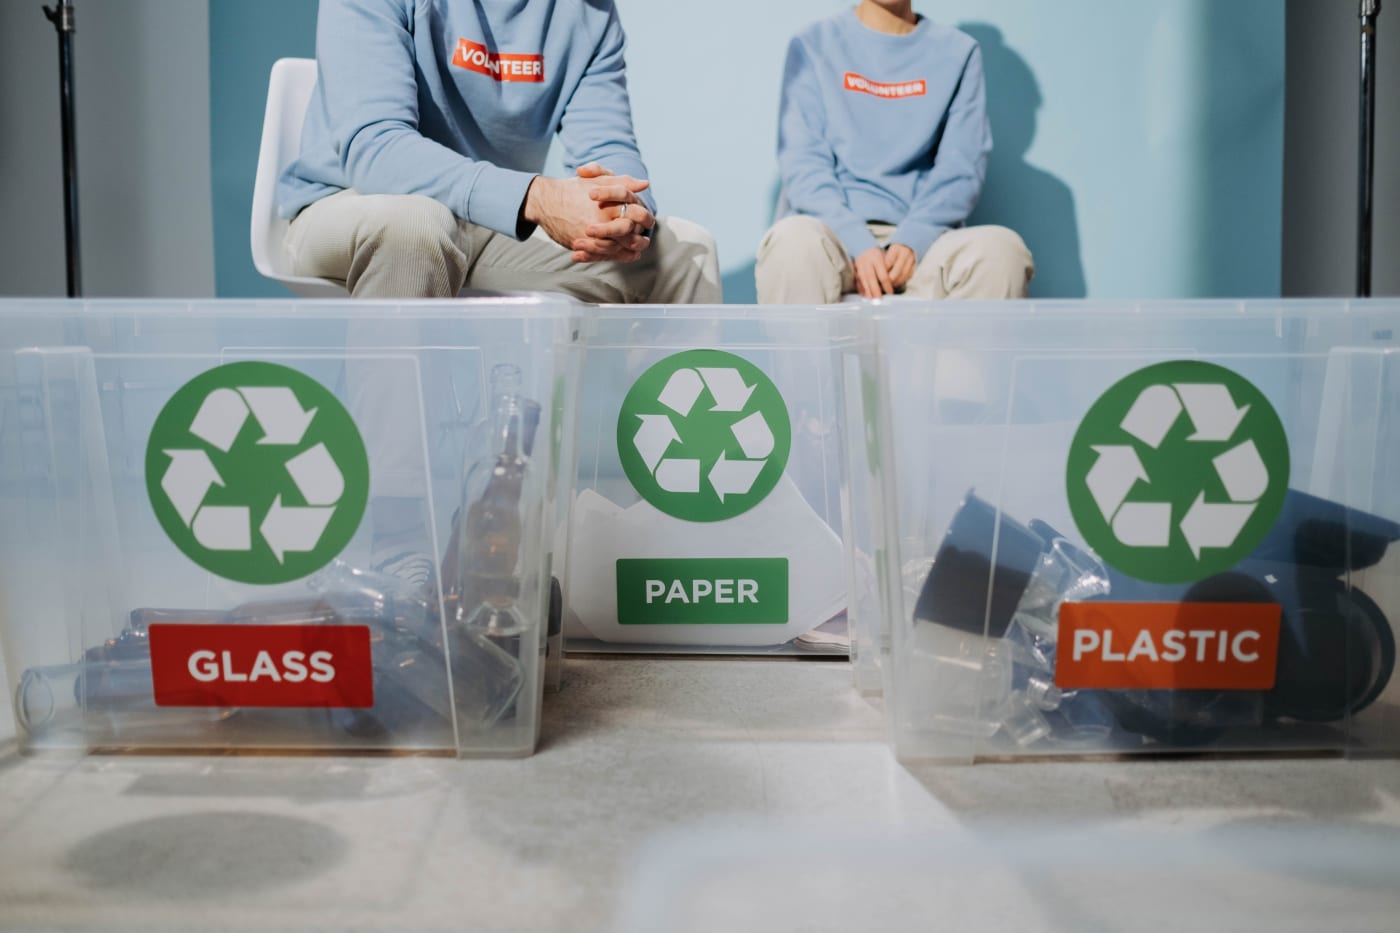 Plastic containers with recycling labels